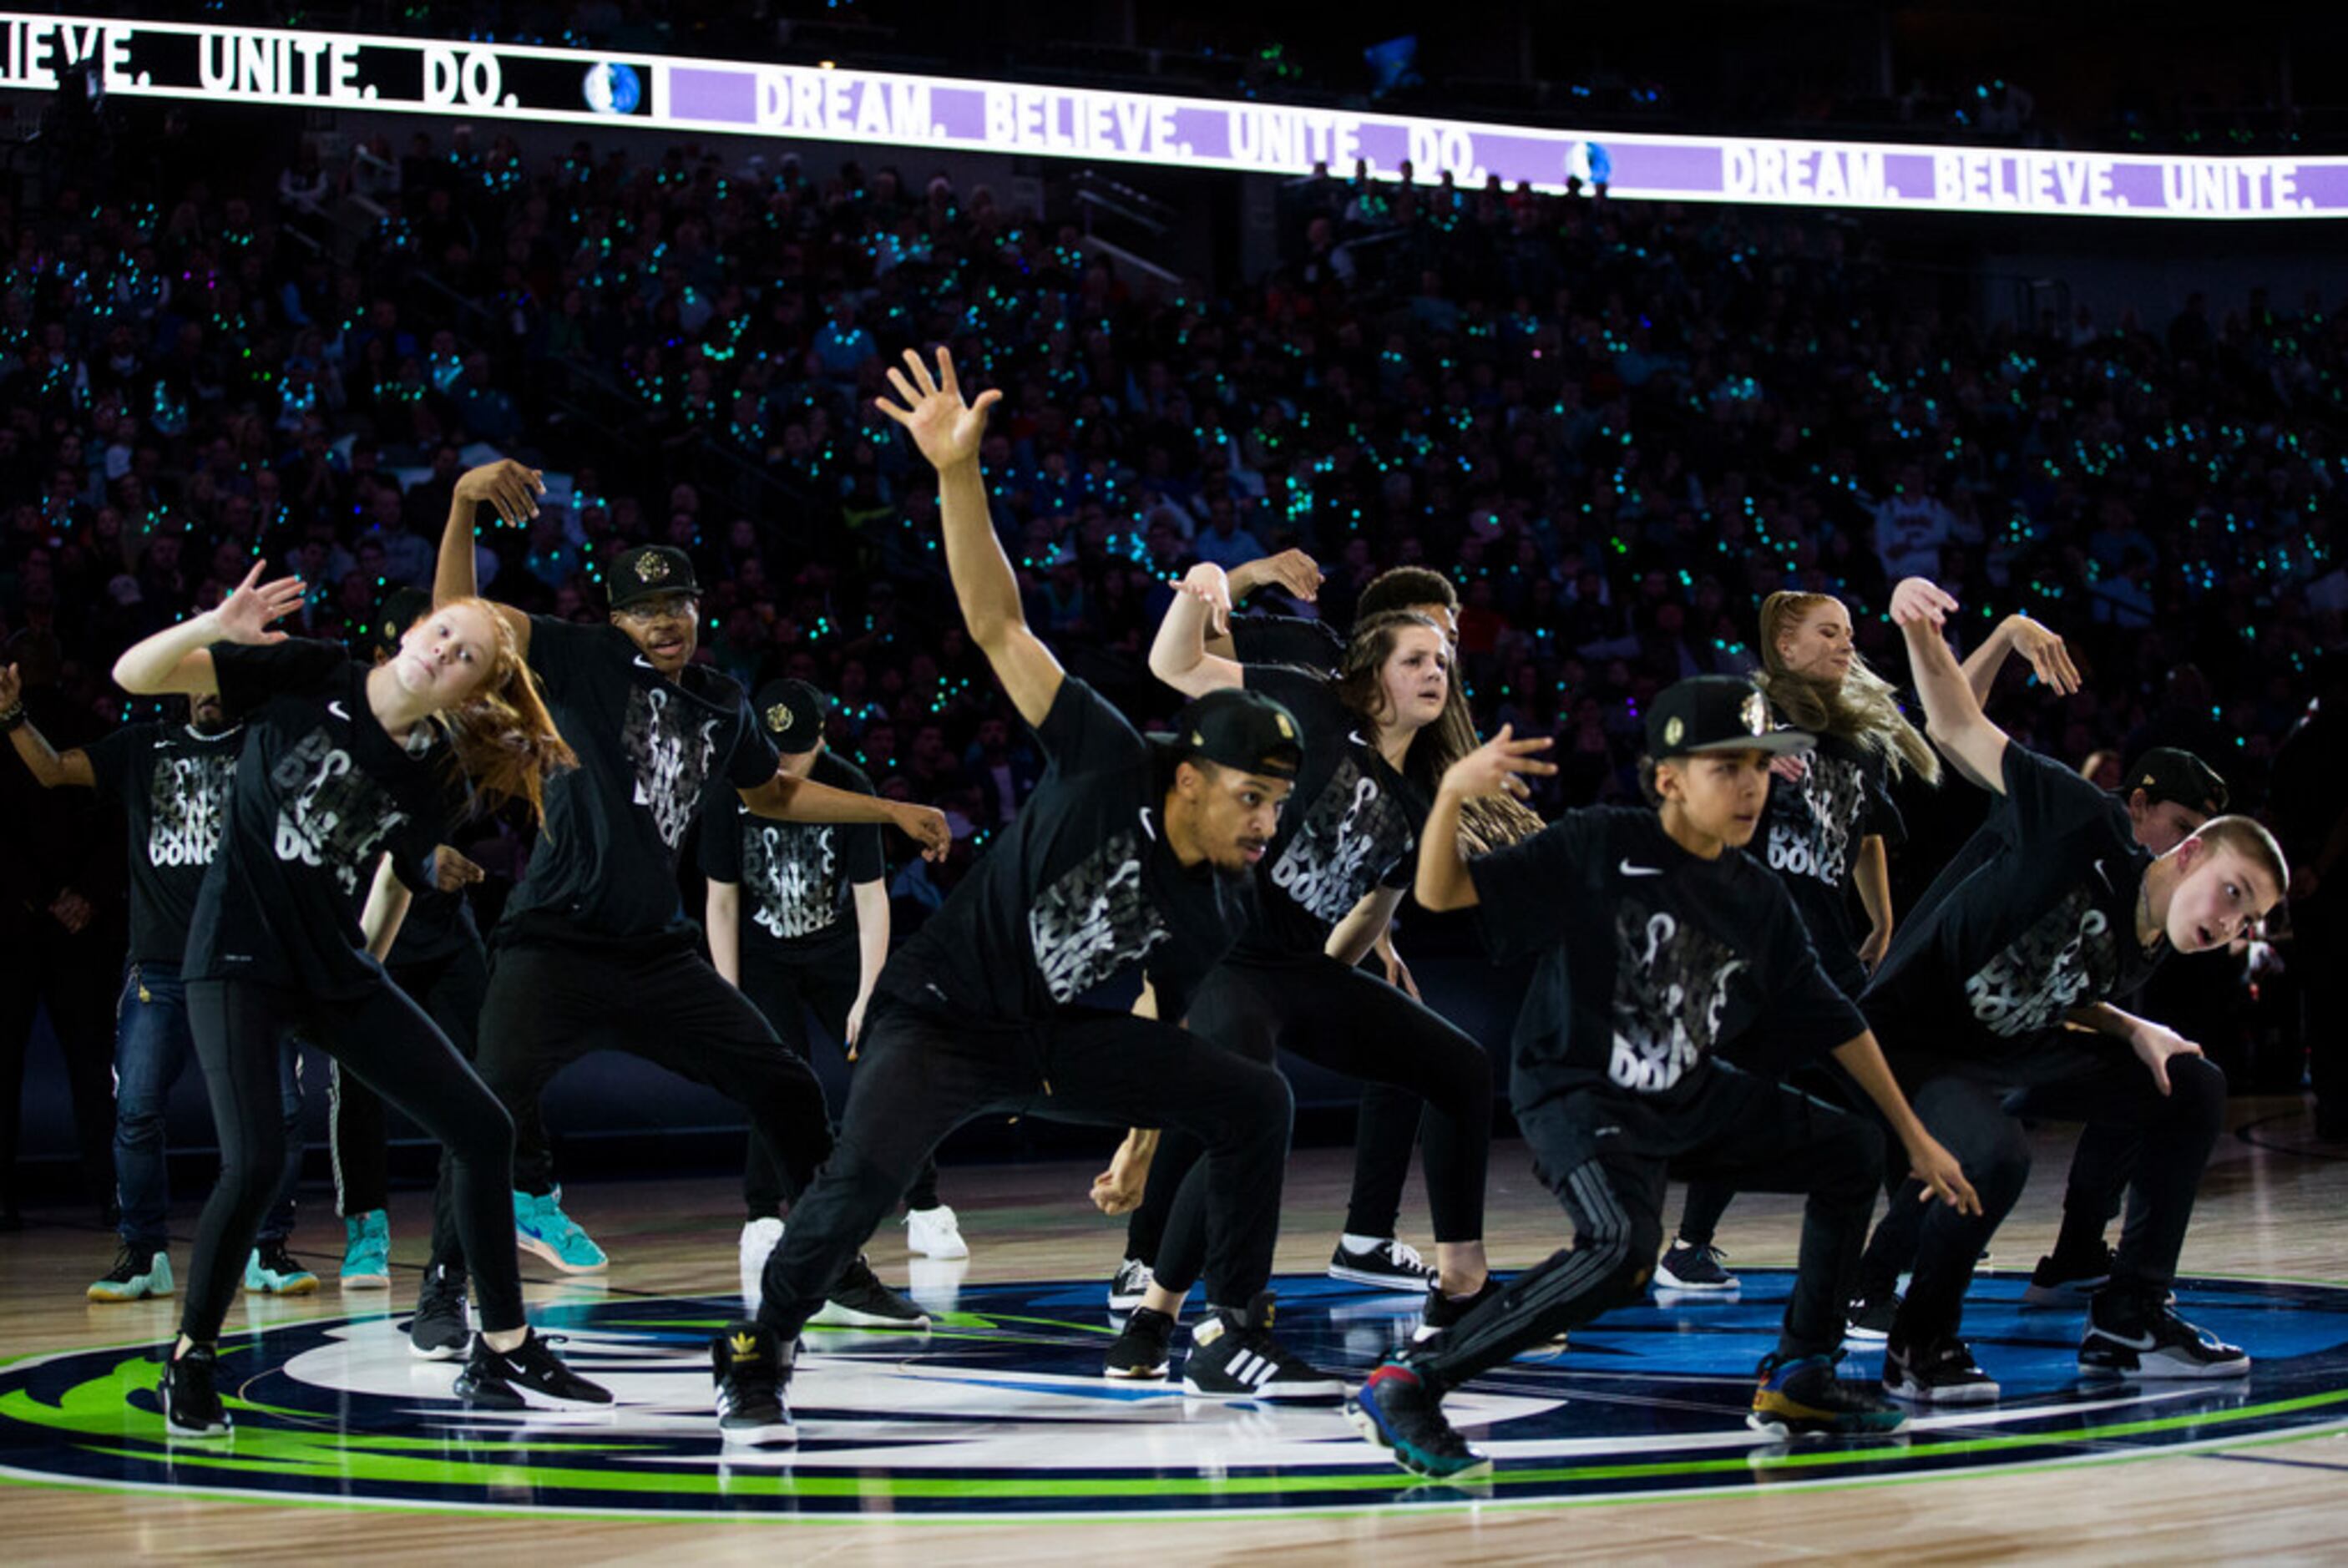 Dancers perform an MLK Day routine during a timeout in the first quarter of an NBA game...